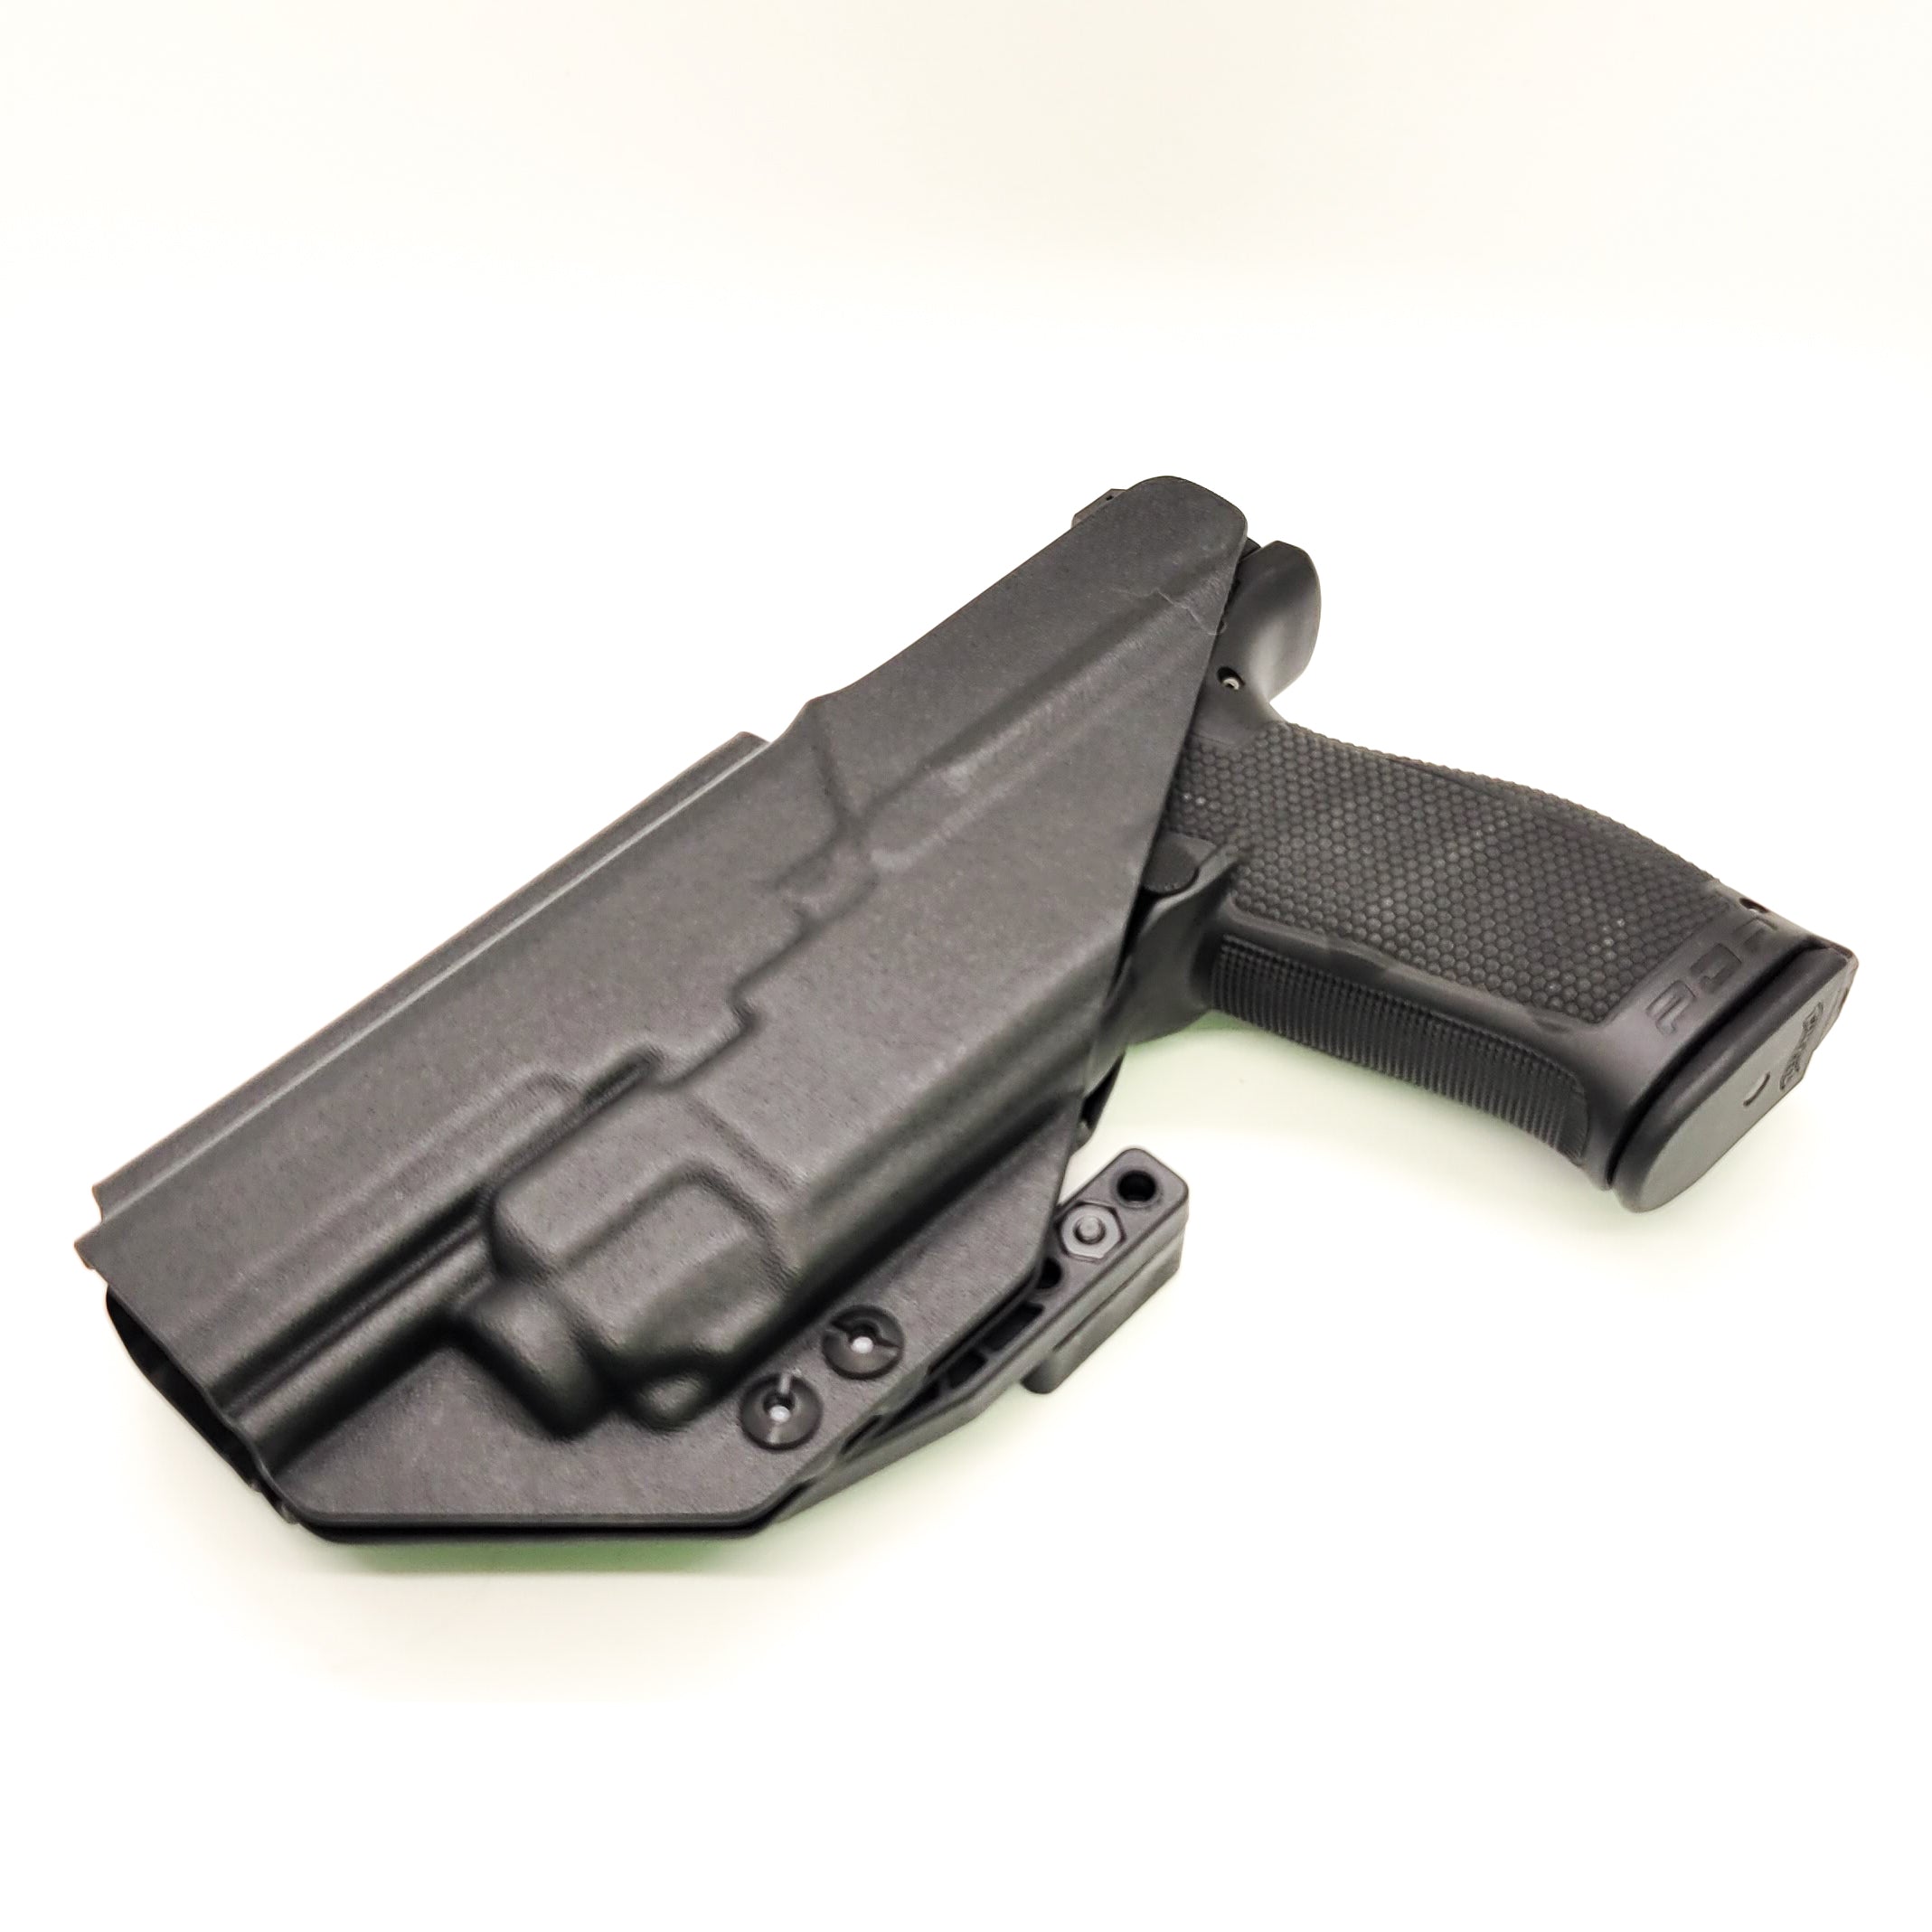 For the best concealed carry Inside Waistband IWB AIWB Holster designed to fit the Walther PDP Pro SD 4.6" pistol with Streamlight TLR-8 on the firearm, shop Four Brothers Holsters. Cut for red dot sight, full sweat guard, adjustable retention & open muzzle for threaded barrels & compensators. TLR8 ProSD